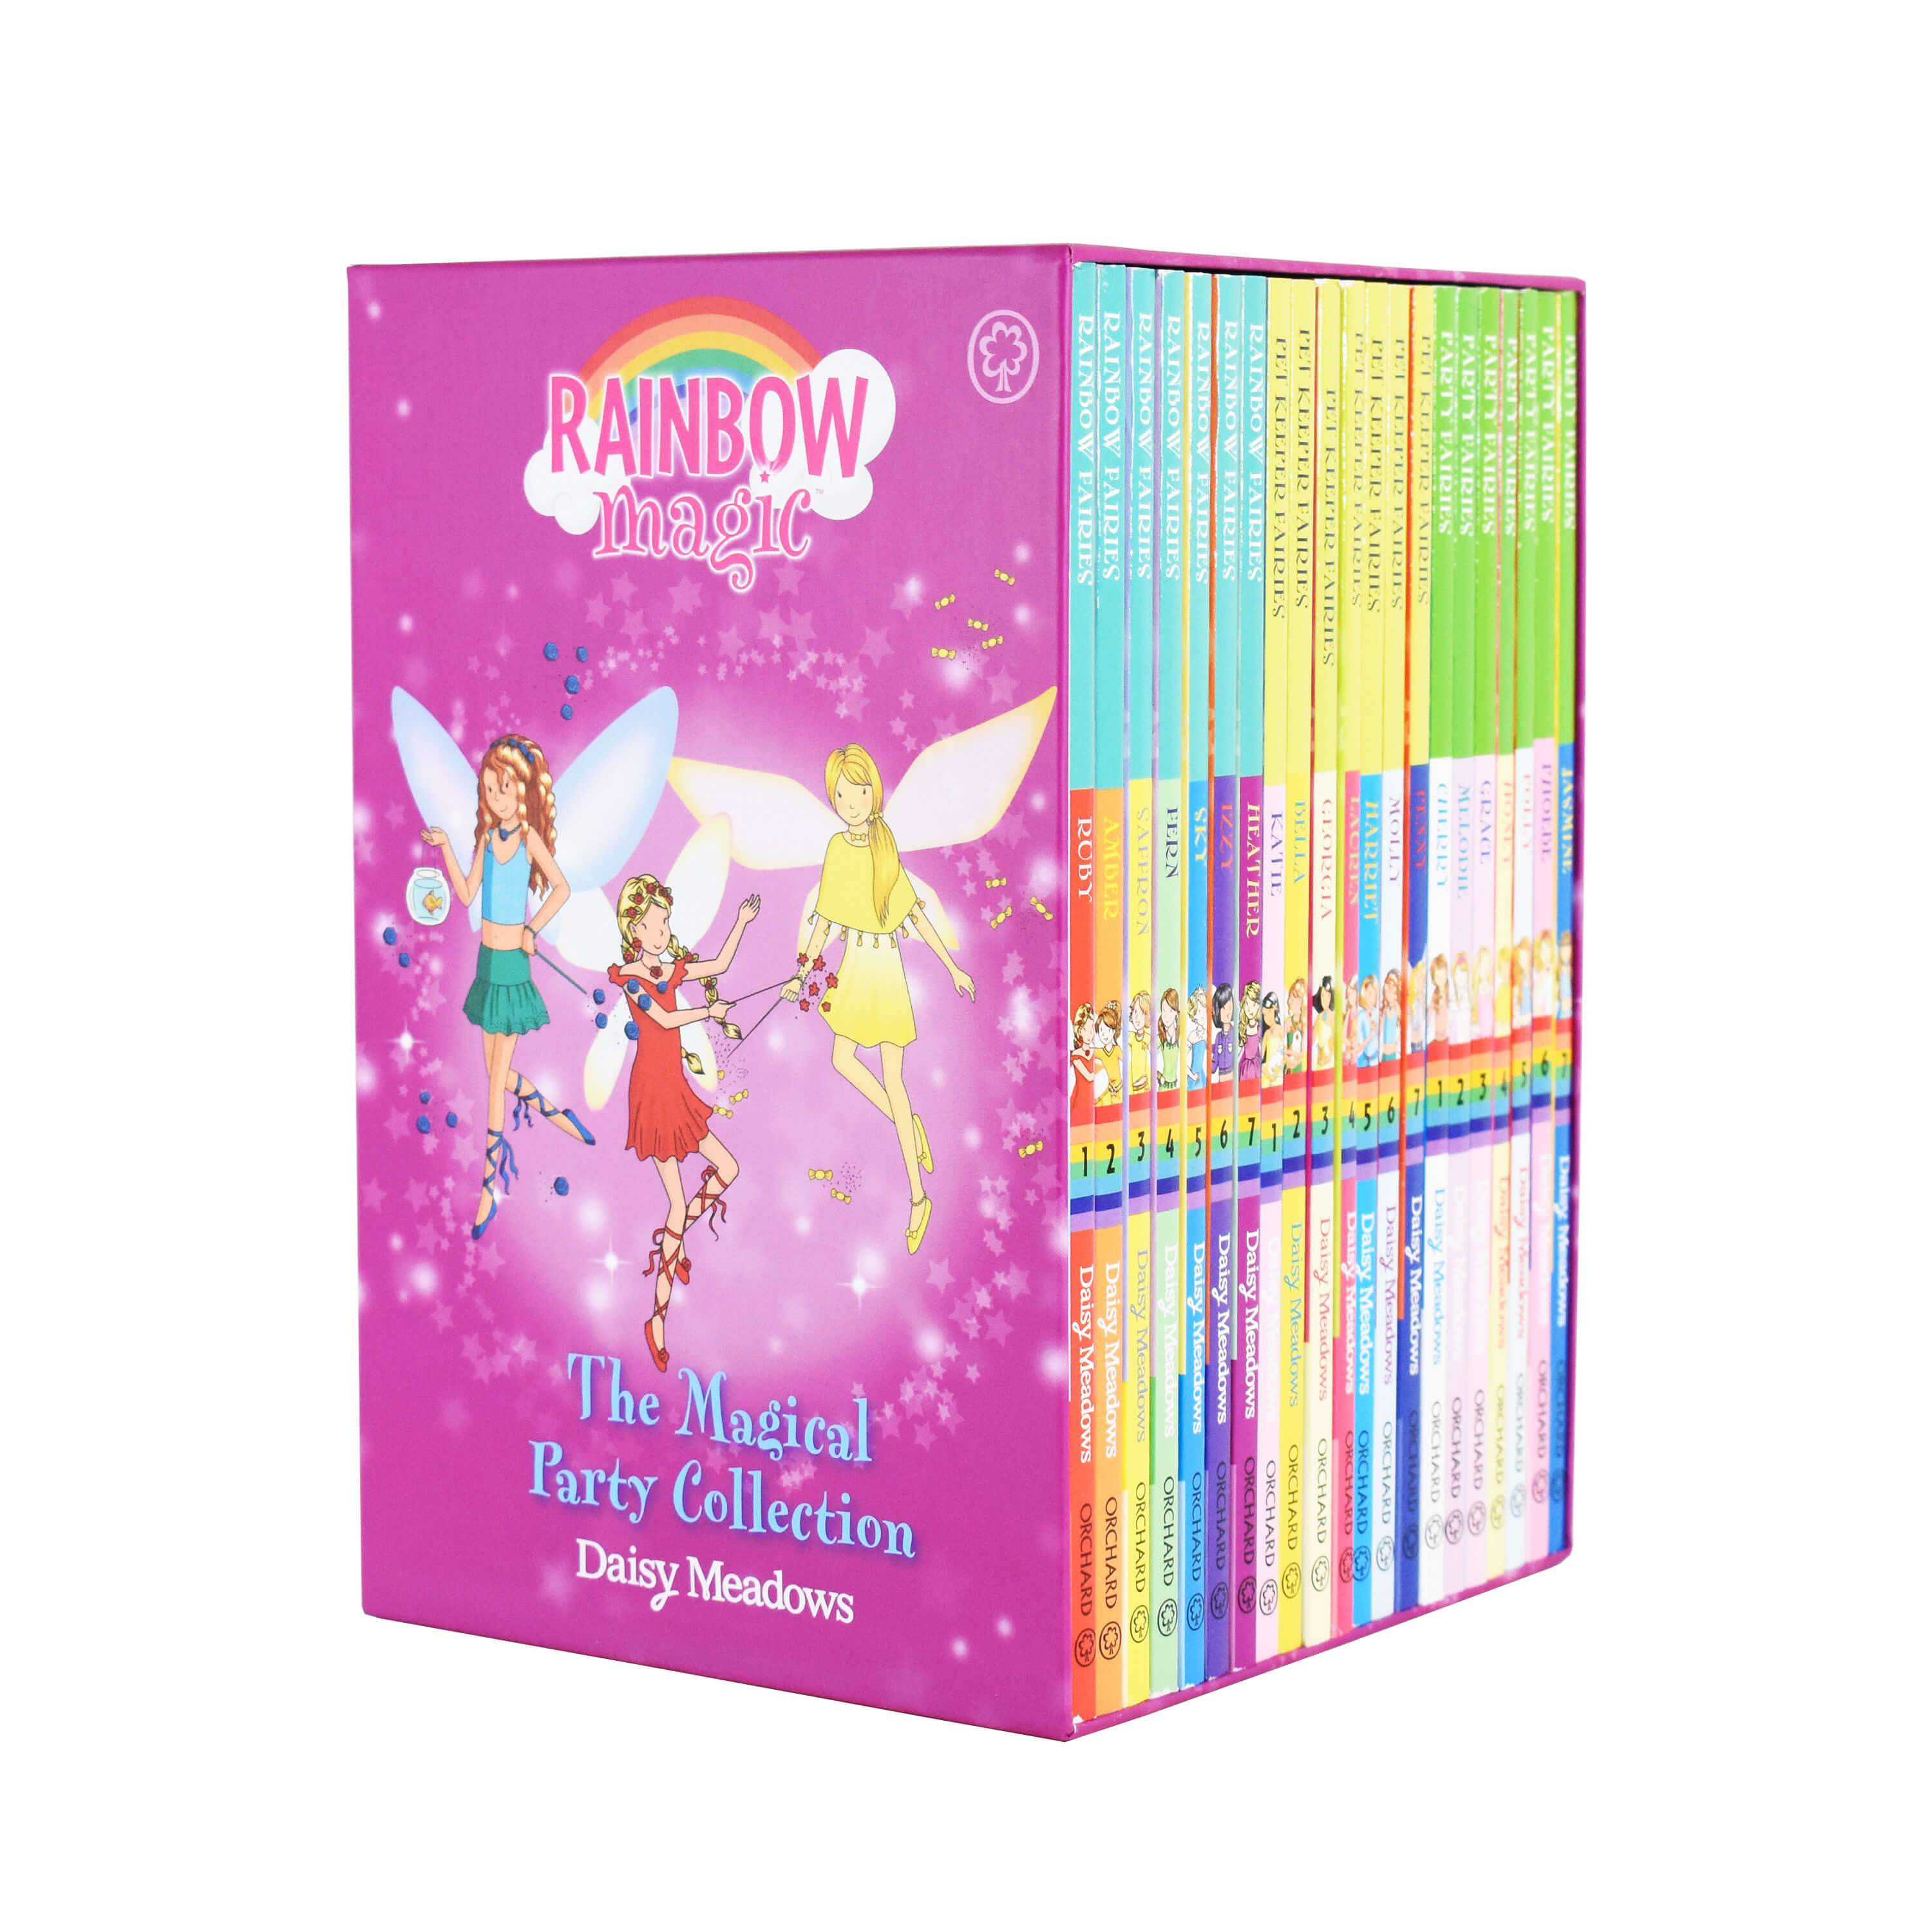 Age 7-9 - Rainbow Magic The Magical Party 21 Books Children Collection Paperback Box Set By Daisy Meadow